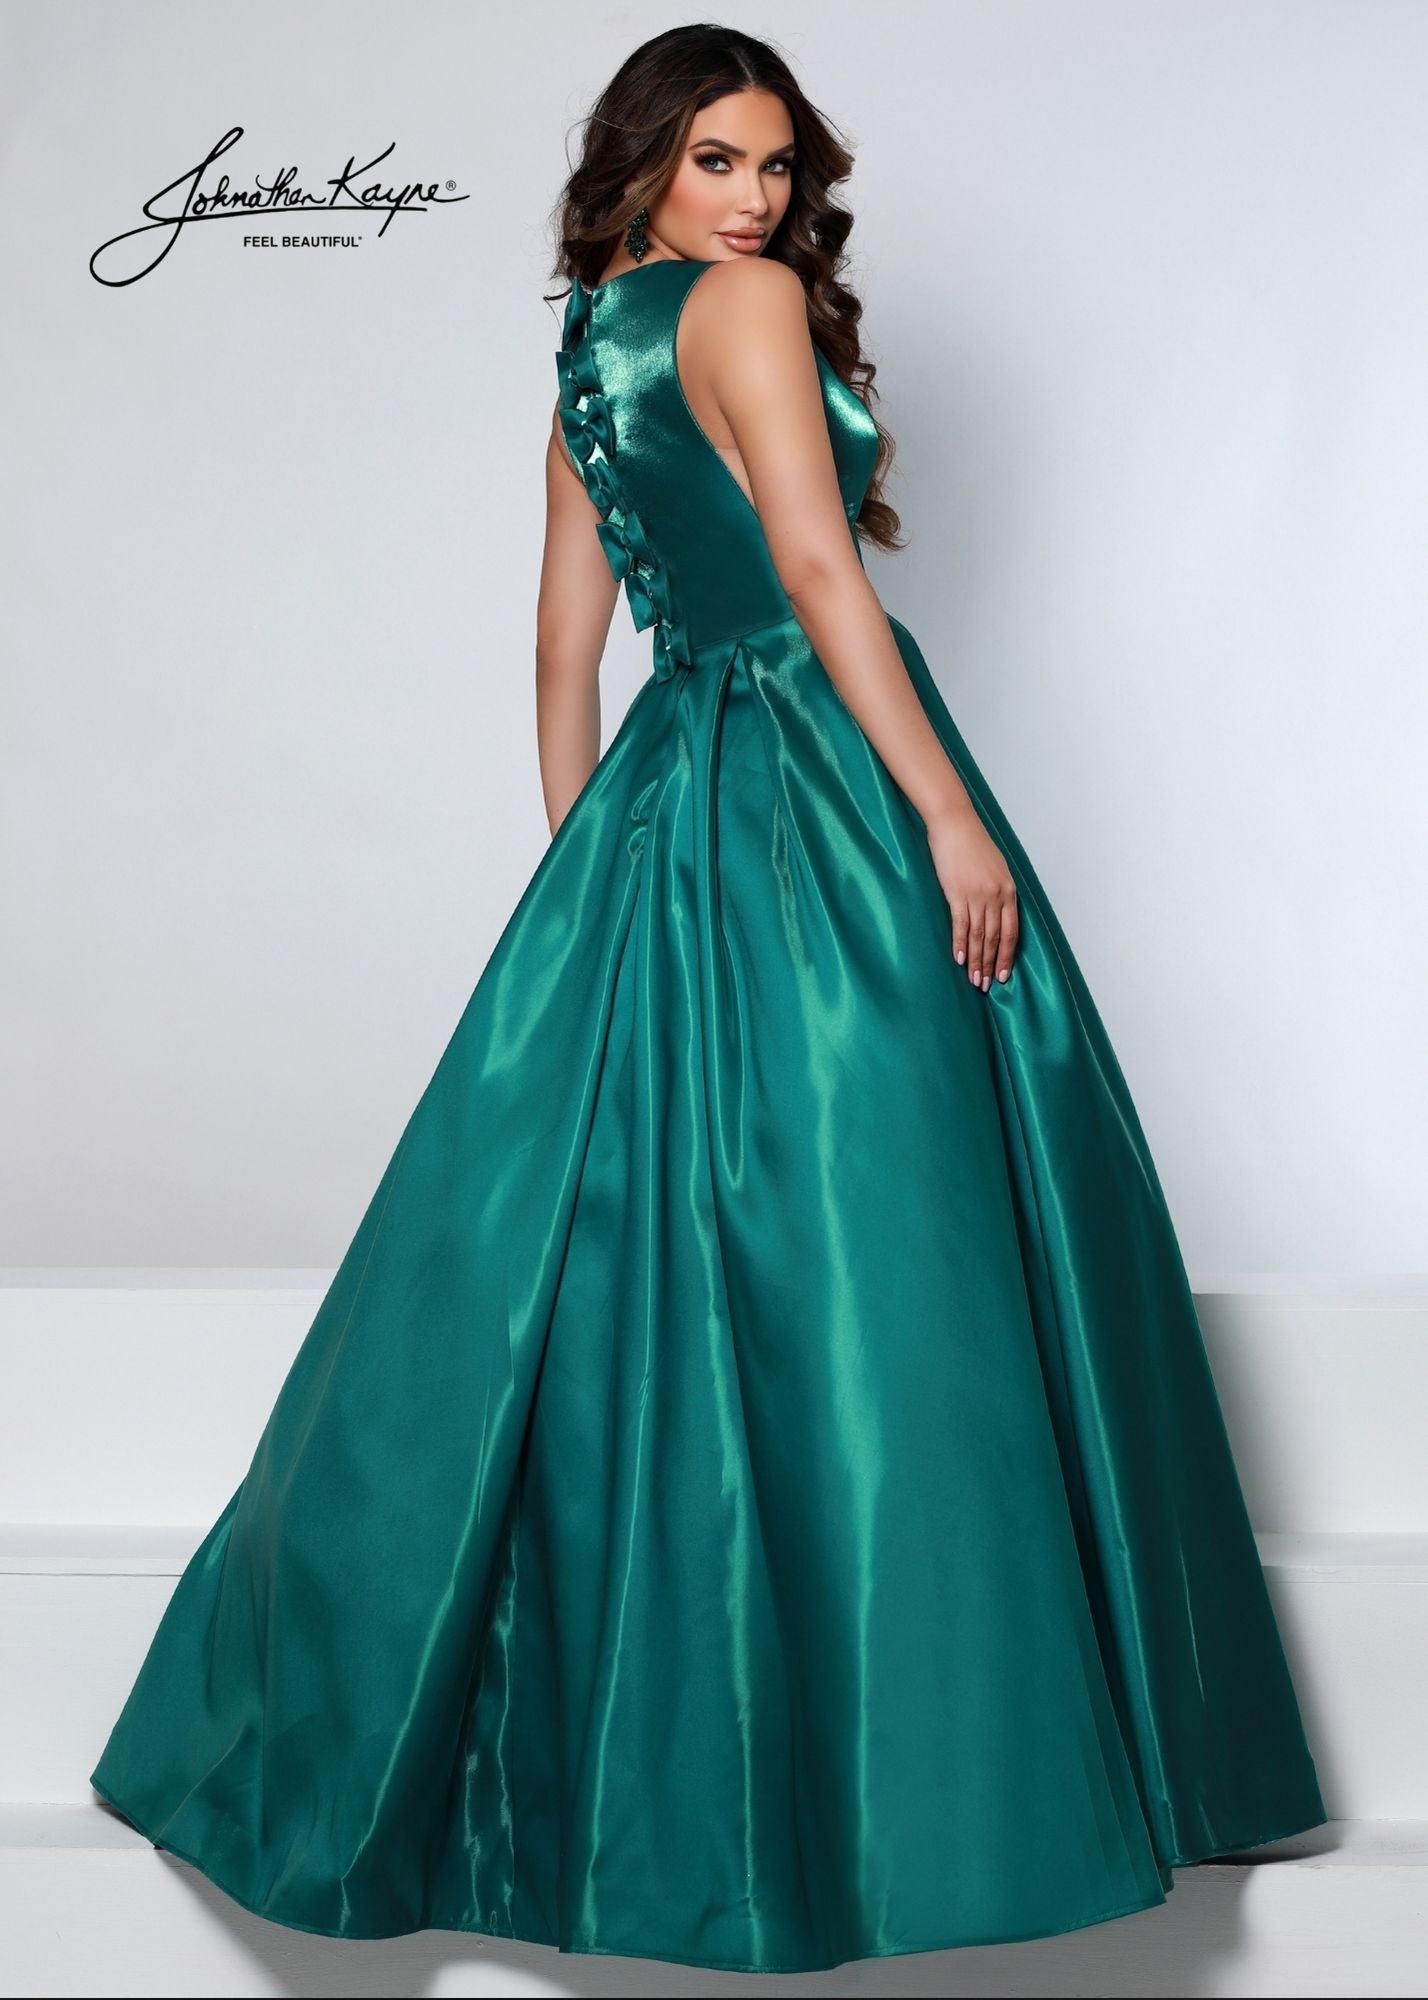 Johnathan Kayne 2550 Size 4 Royal A-Line Ballgown Satin Plunging Neckline Side Cut Outs Bows In Back Prom Gown. This elegant Johnathan Kayne 2550 Prom Gown is crafted in Royal satin fabric and features a classic A-line silhouette. It boasts a plunging neckline, side cut-outs and bows in the back for a luxurious look. Size 4.